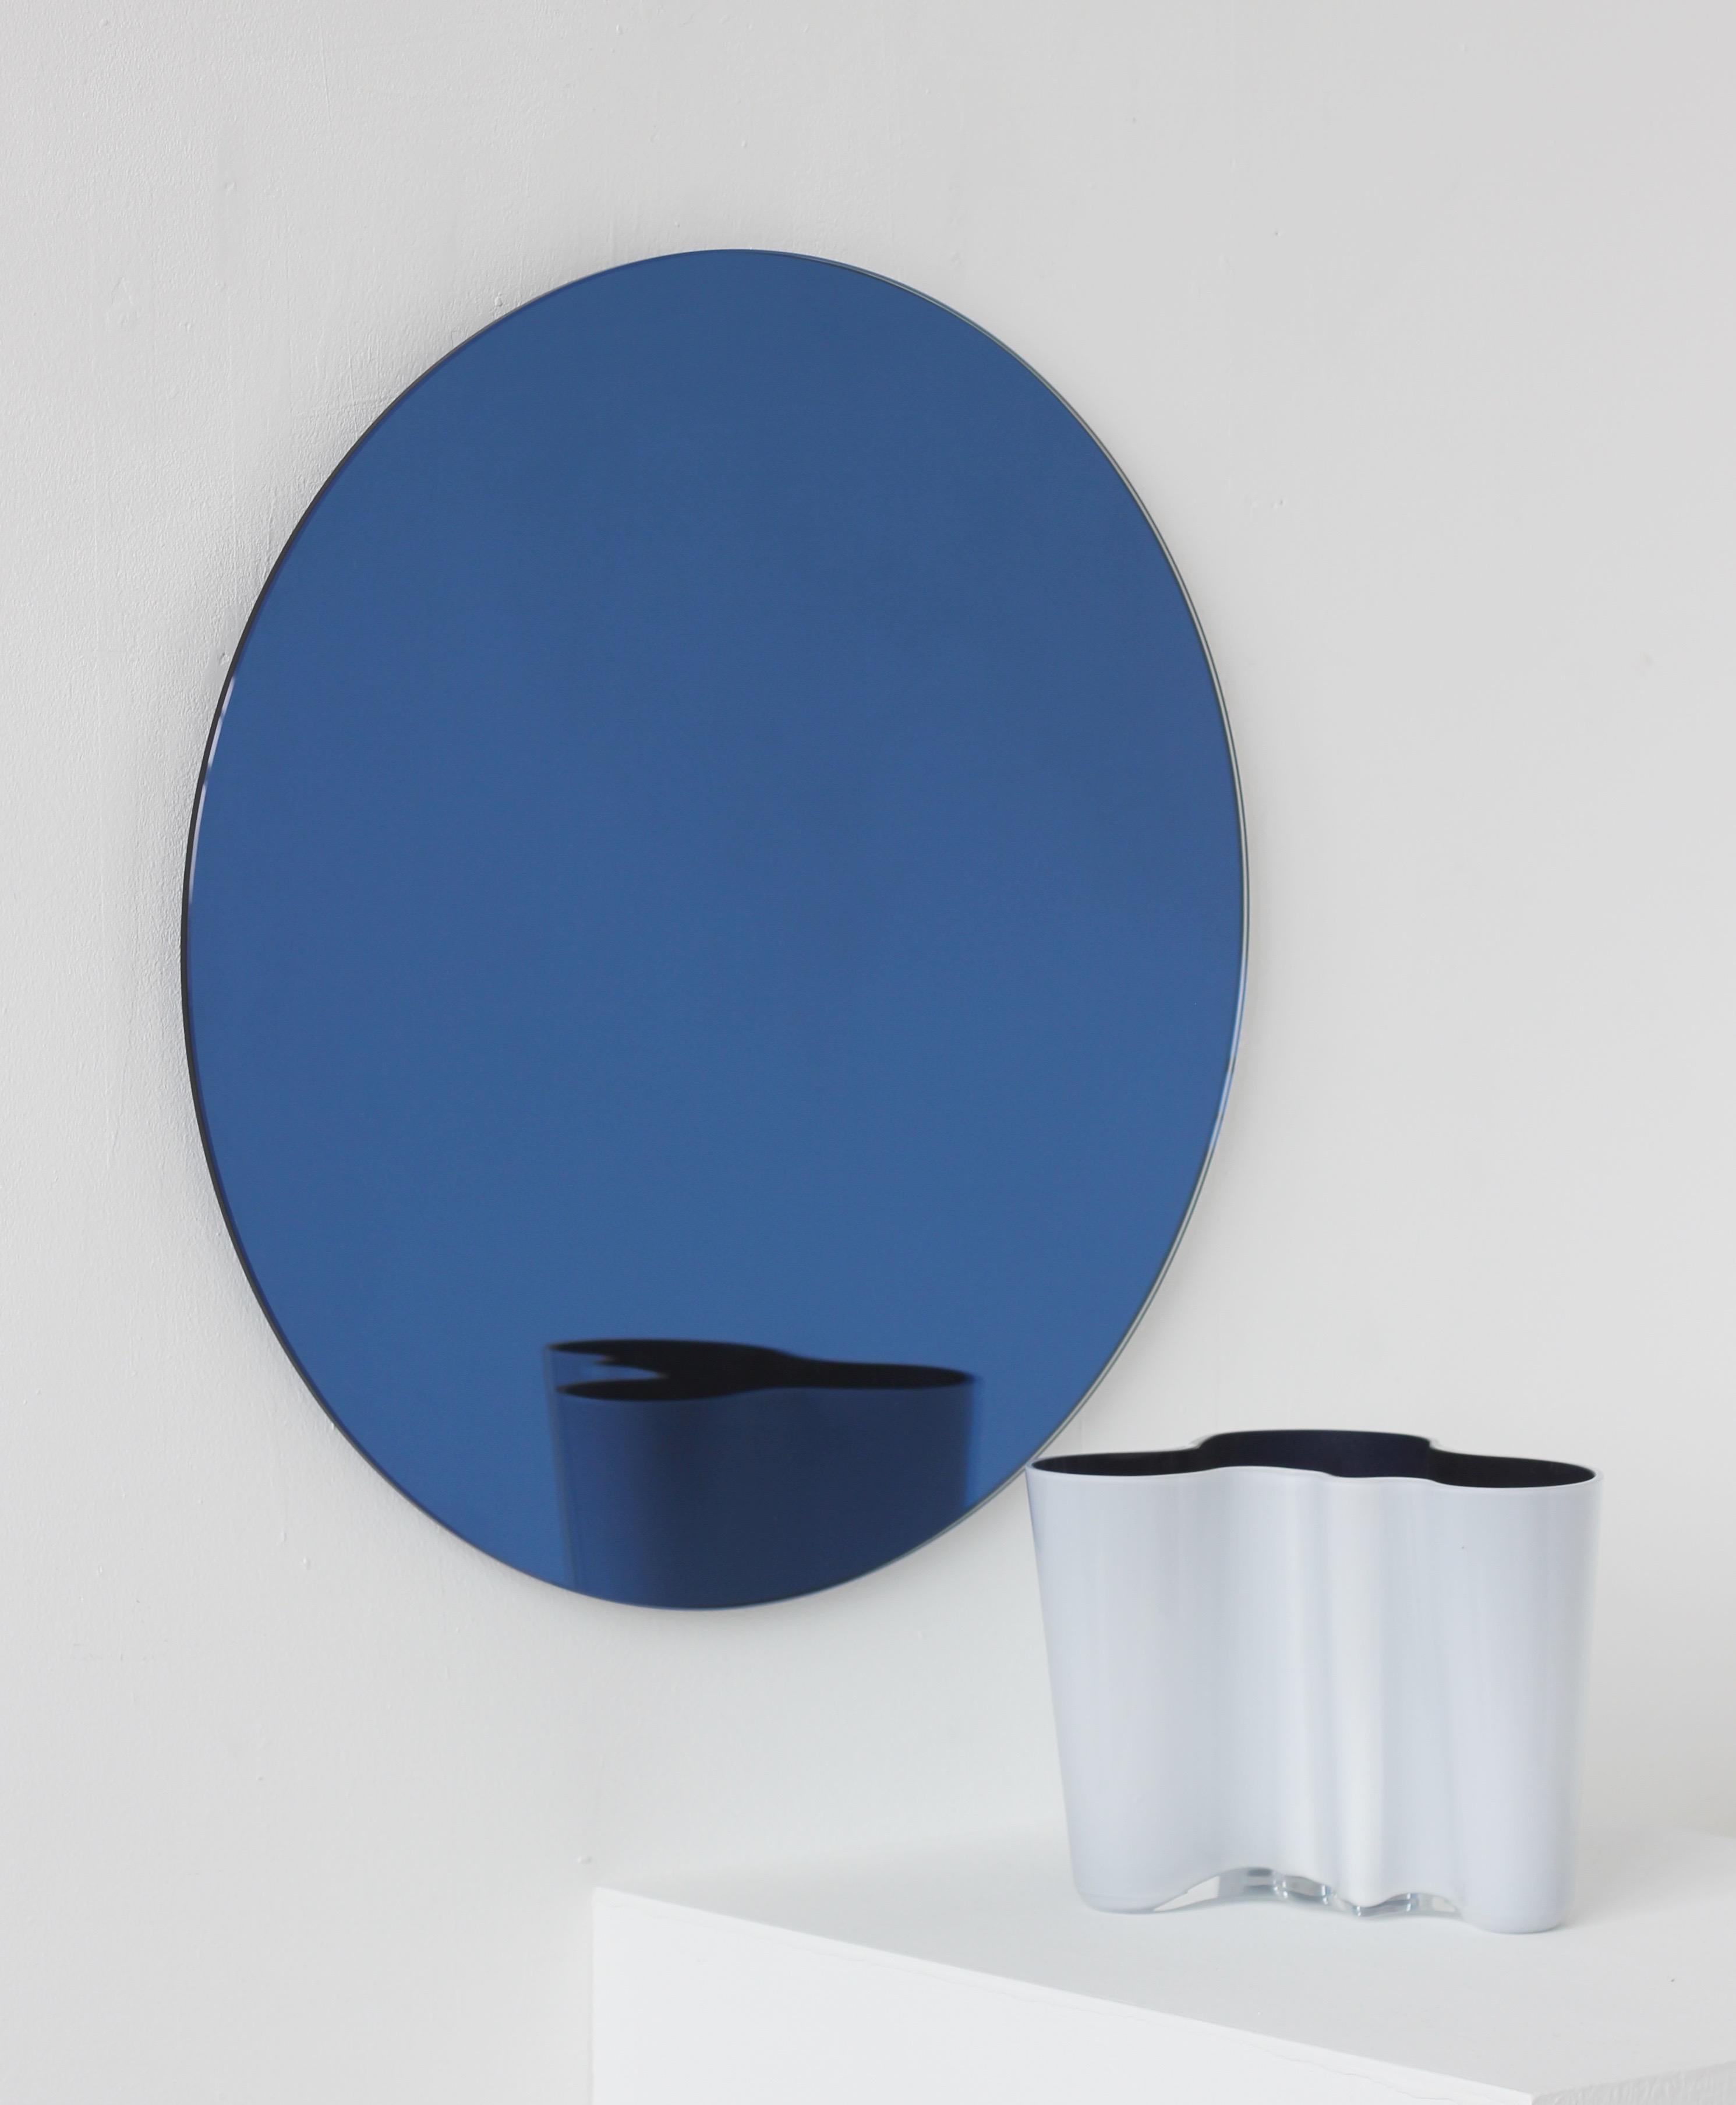 Charming and minimalist round frameless blue tinted Orbis™ mirror with a floating effect. Quality design that ensures the mirror sits perfectly parallel to the wall. Designed and made in London, UK.

Fitted with professional plates not visible once